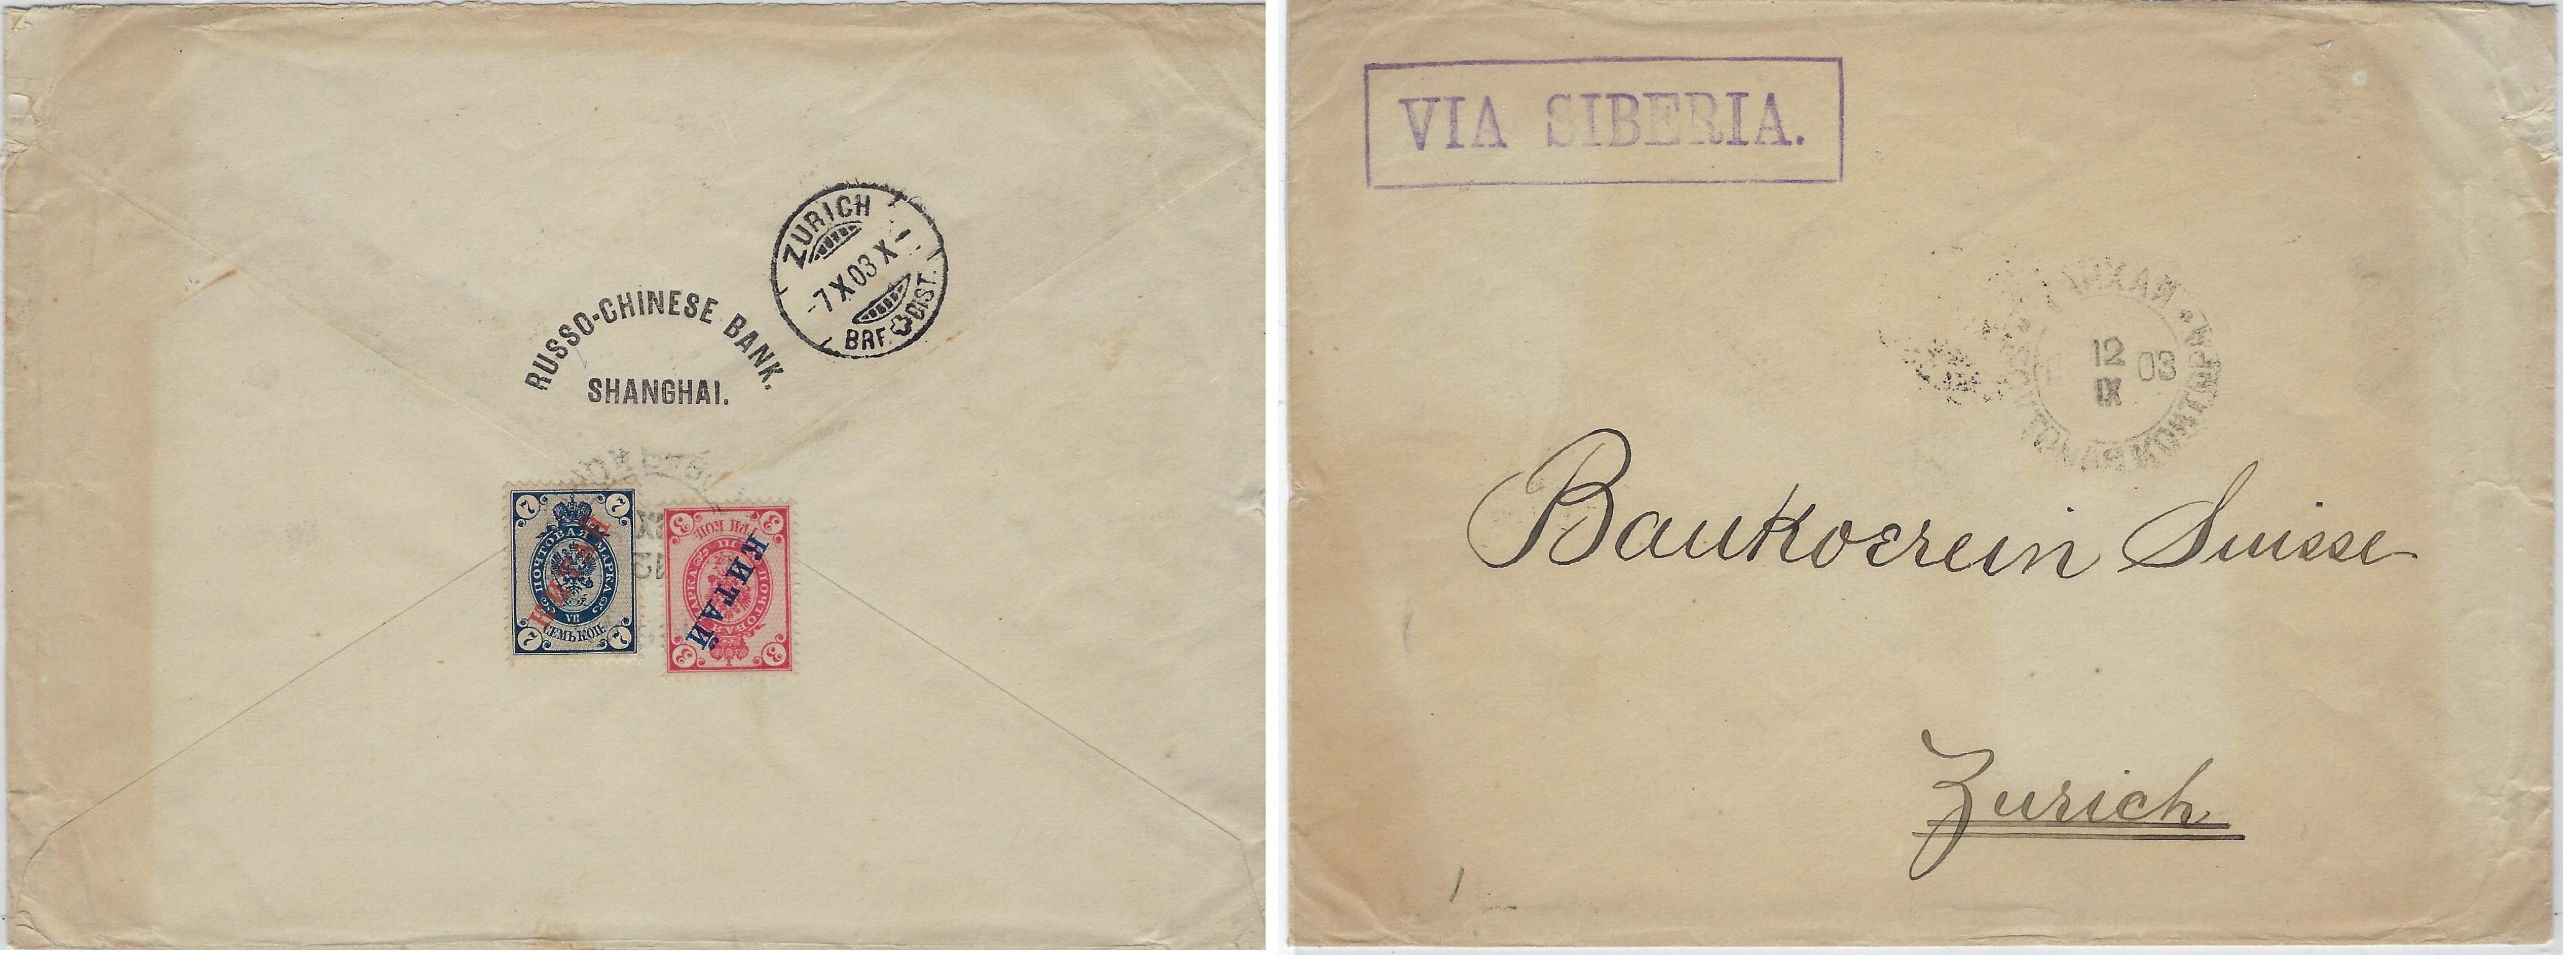 Russia Postal History - Offices in China. Scott 4001903 